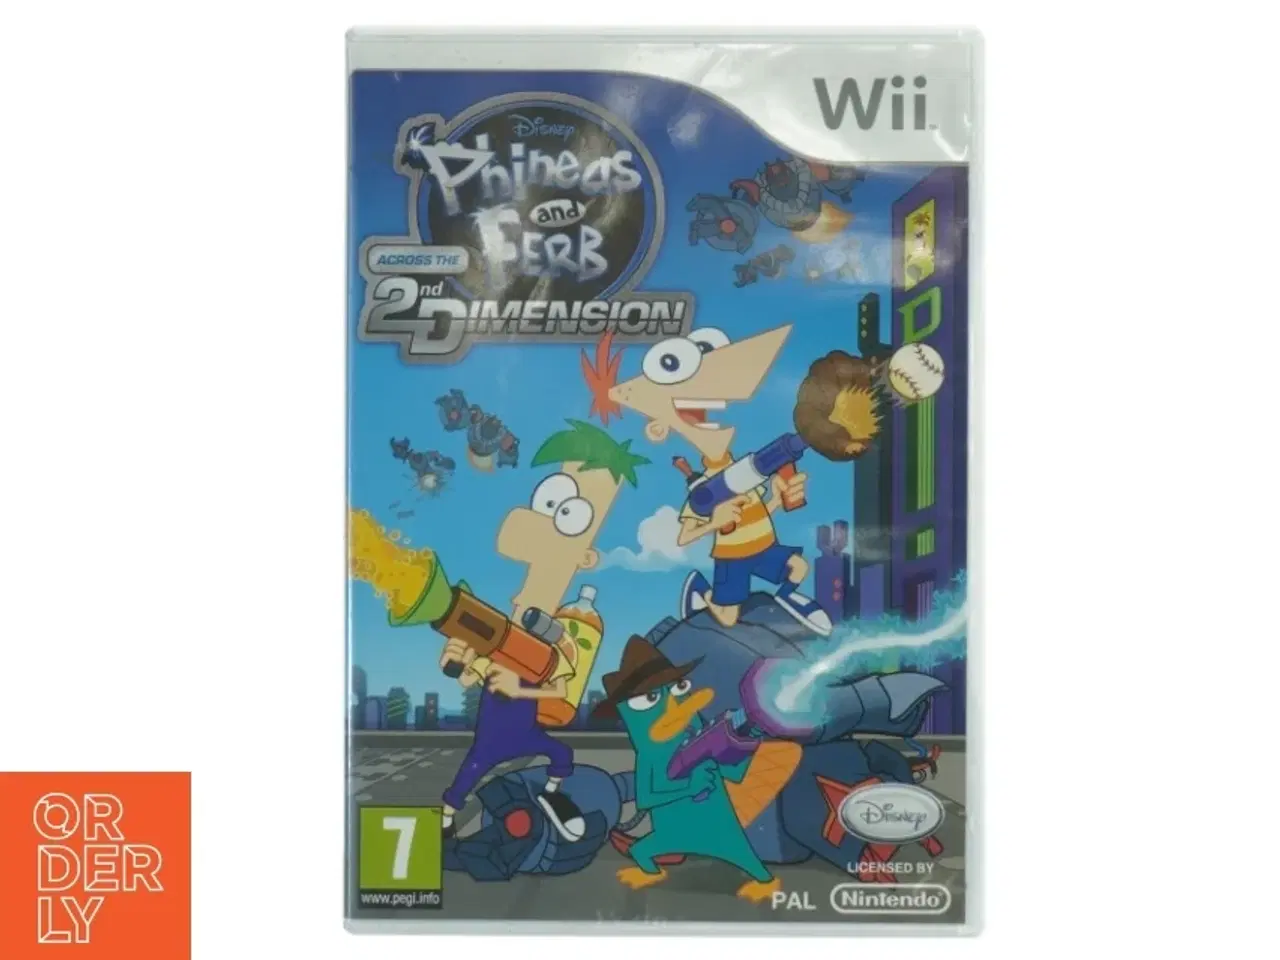 Billede 1 - Phineas and Ferb: Across the 2nd Dimension Wii spil fra Wii (str. 19 x 13 cm)